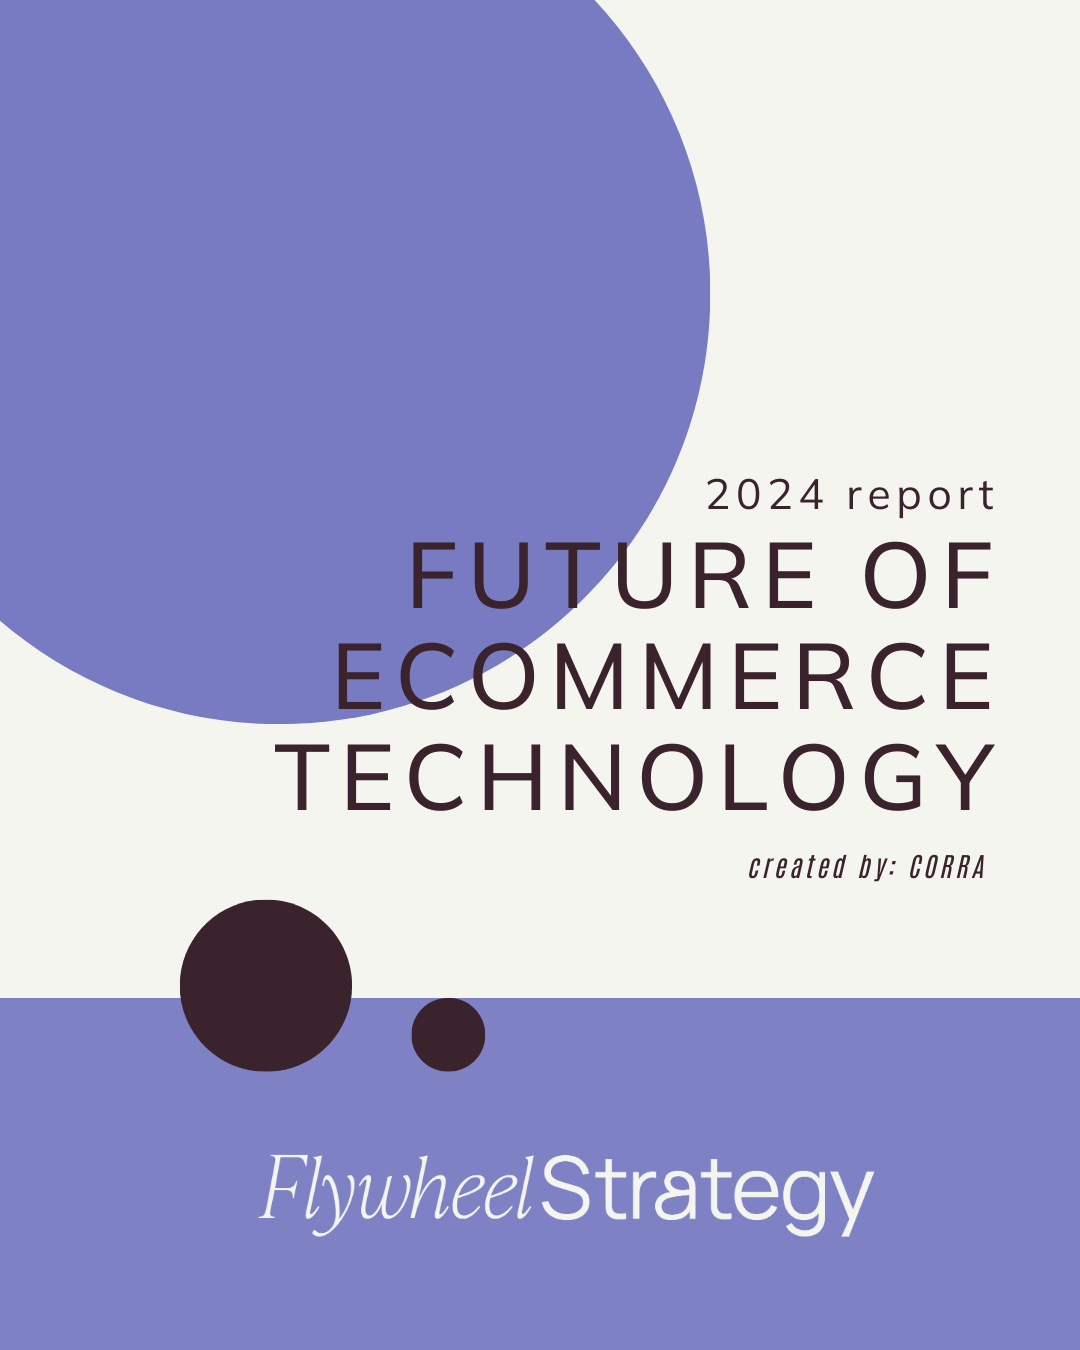 The future of ecommerce technology. 2024 report. Flywheel Strategy.